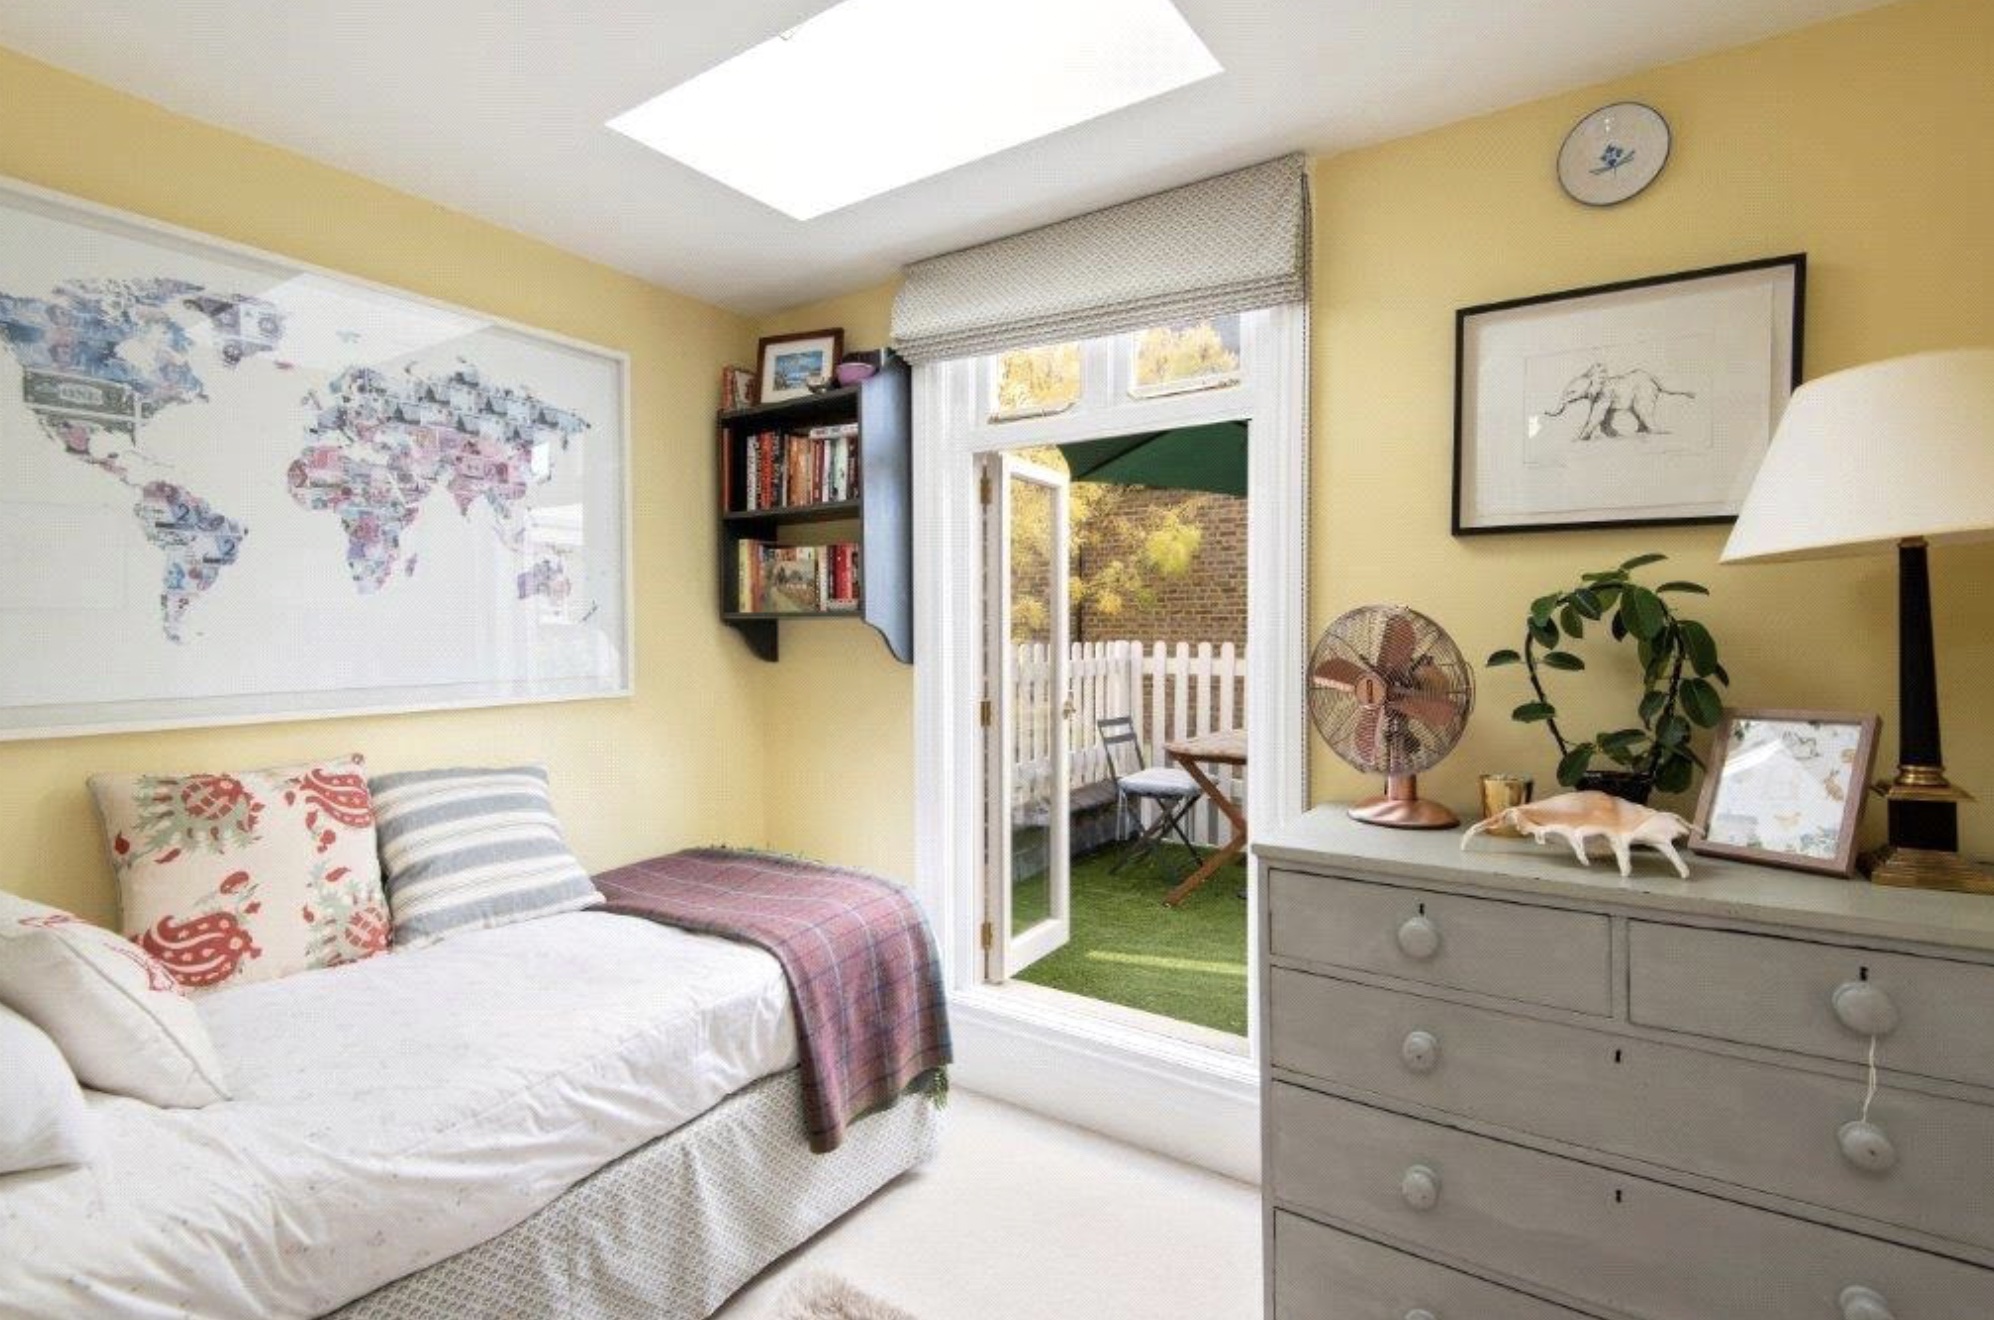 The third bedroom that would work well as a home office (credit: Chelwood Partners)